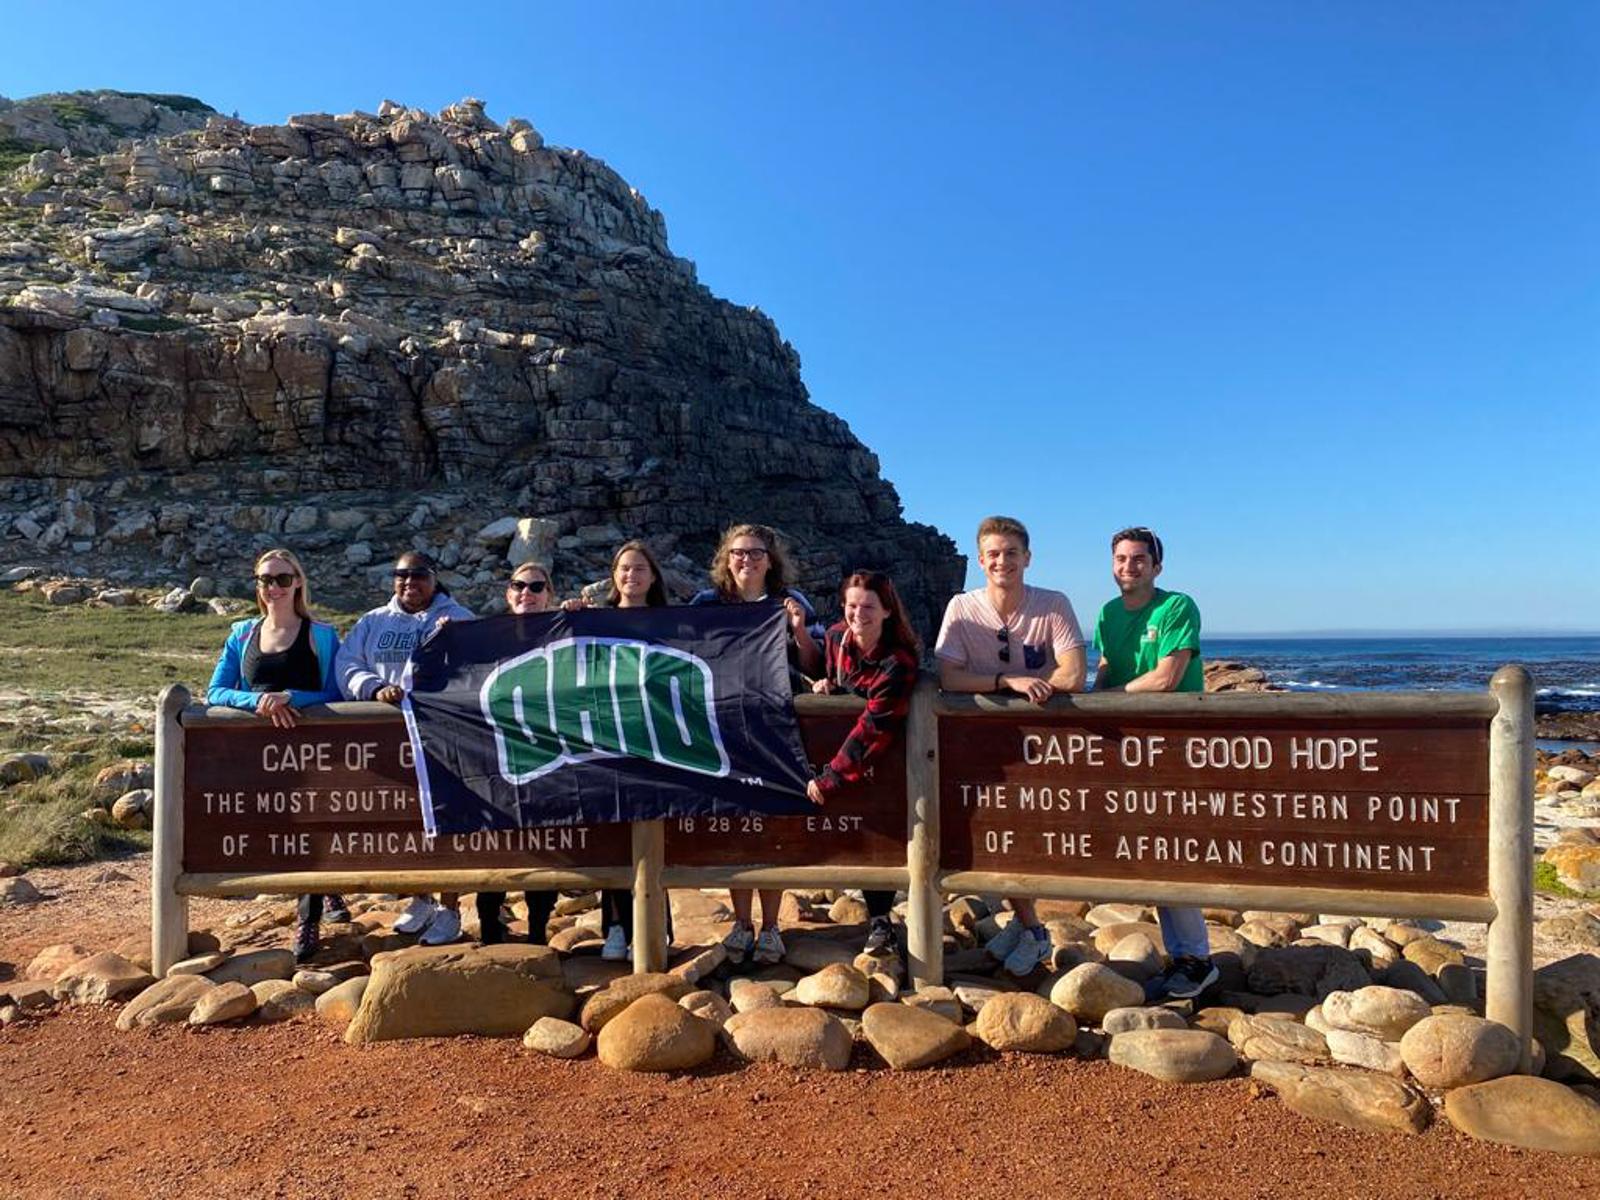 Cape of Good Hope, South Africa: HCOM represents in Southern Africa